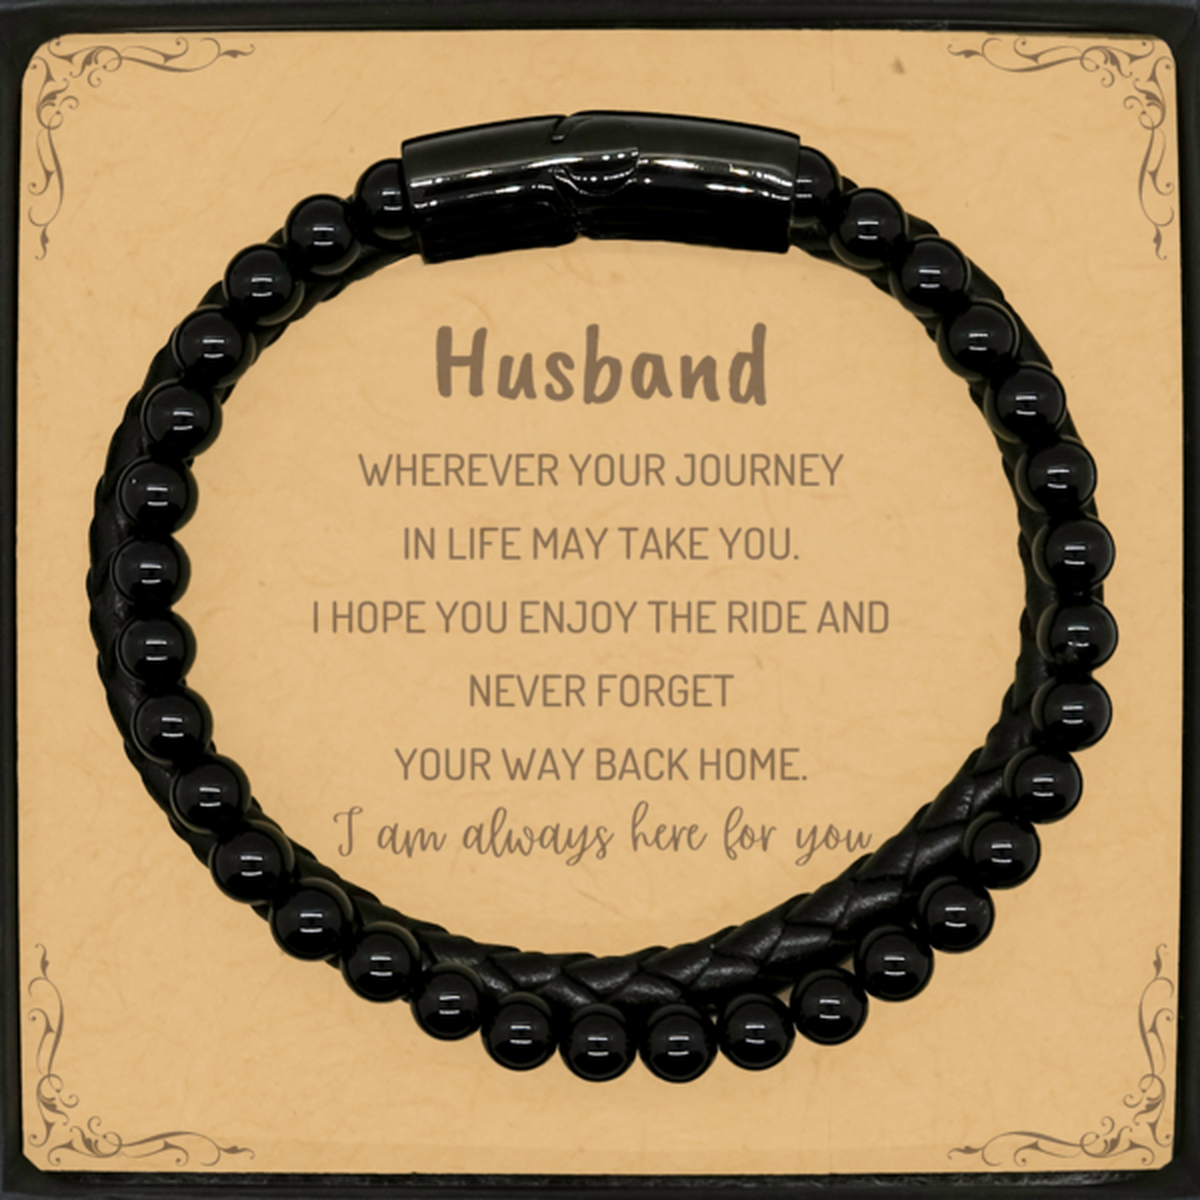 Husband wherever your journey in life may take you, I am always here for you Husband Stone Leather Bracelets, Awesome Christmas Gifts For Husband Message Card, Husband Birthday Gifts for Men Women Family Loved One